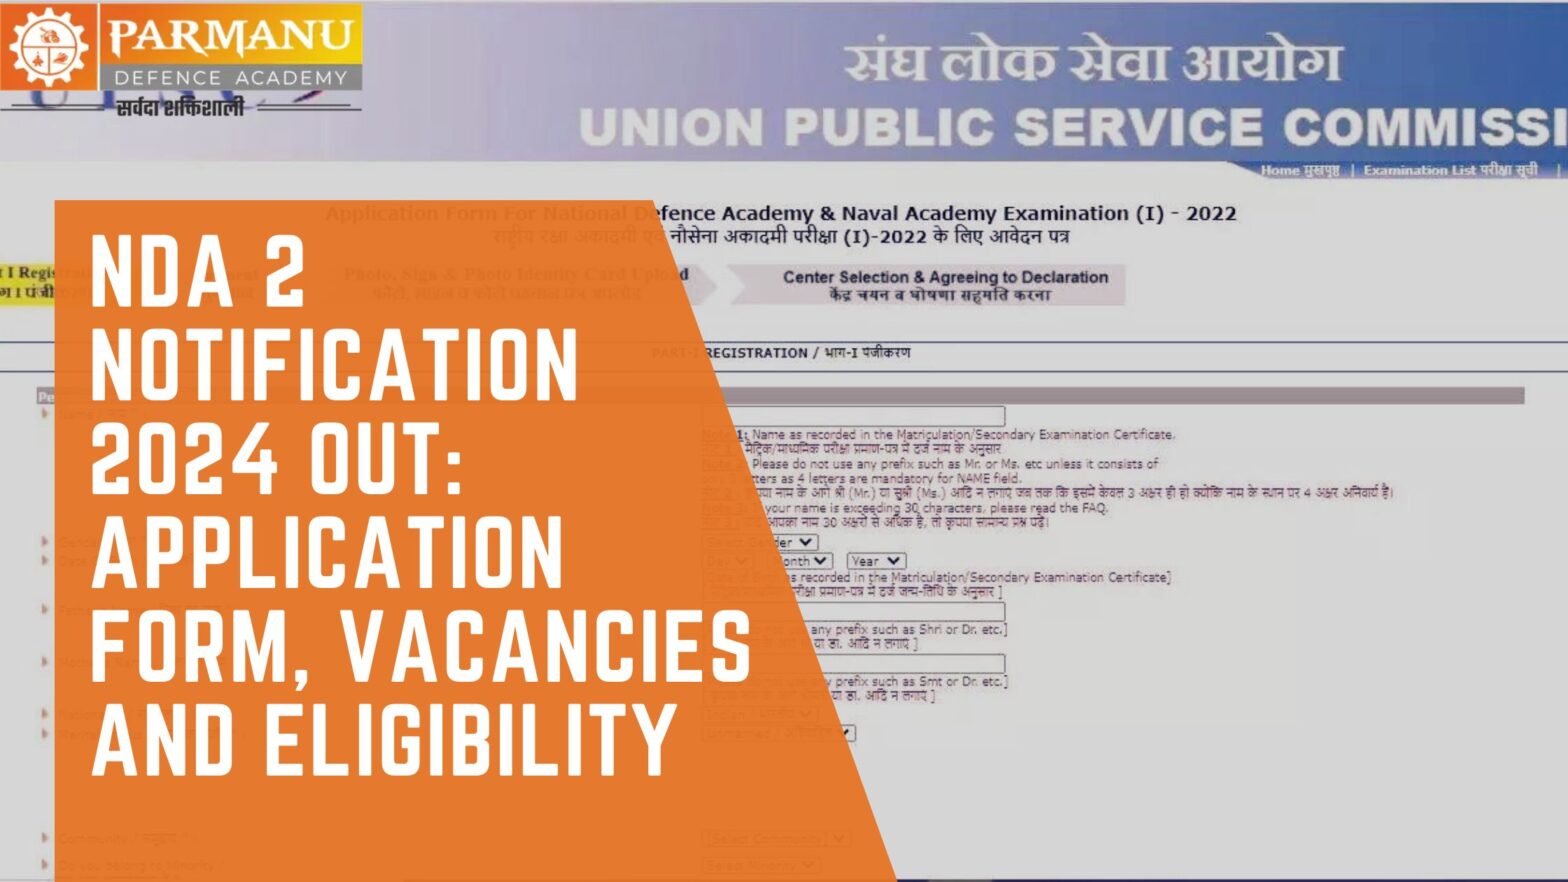 NDA 2 Notification 2024 Out Application Form, Vacancies and Eligibility